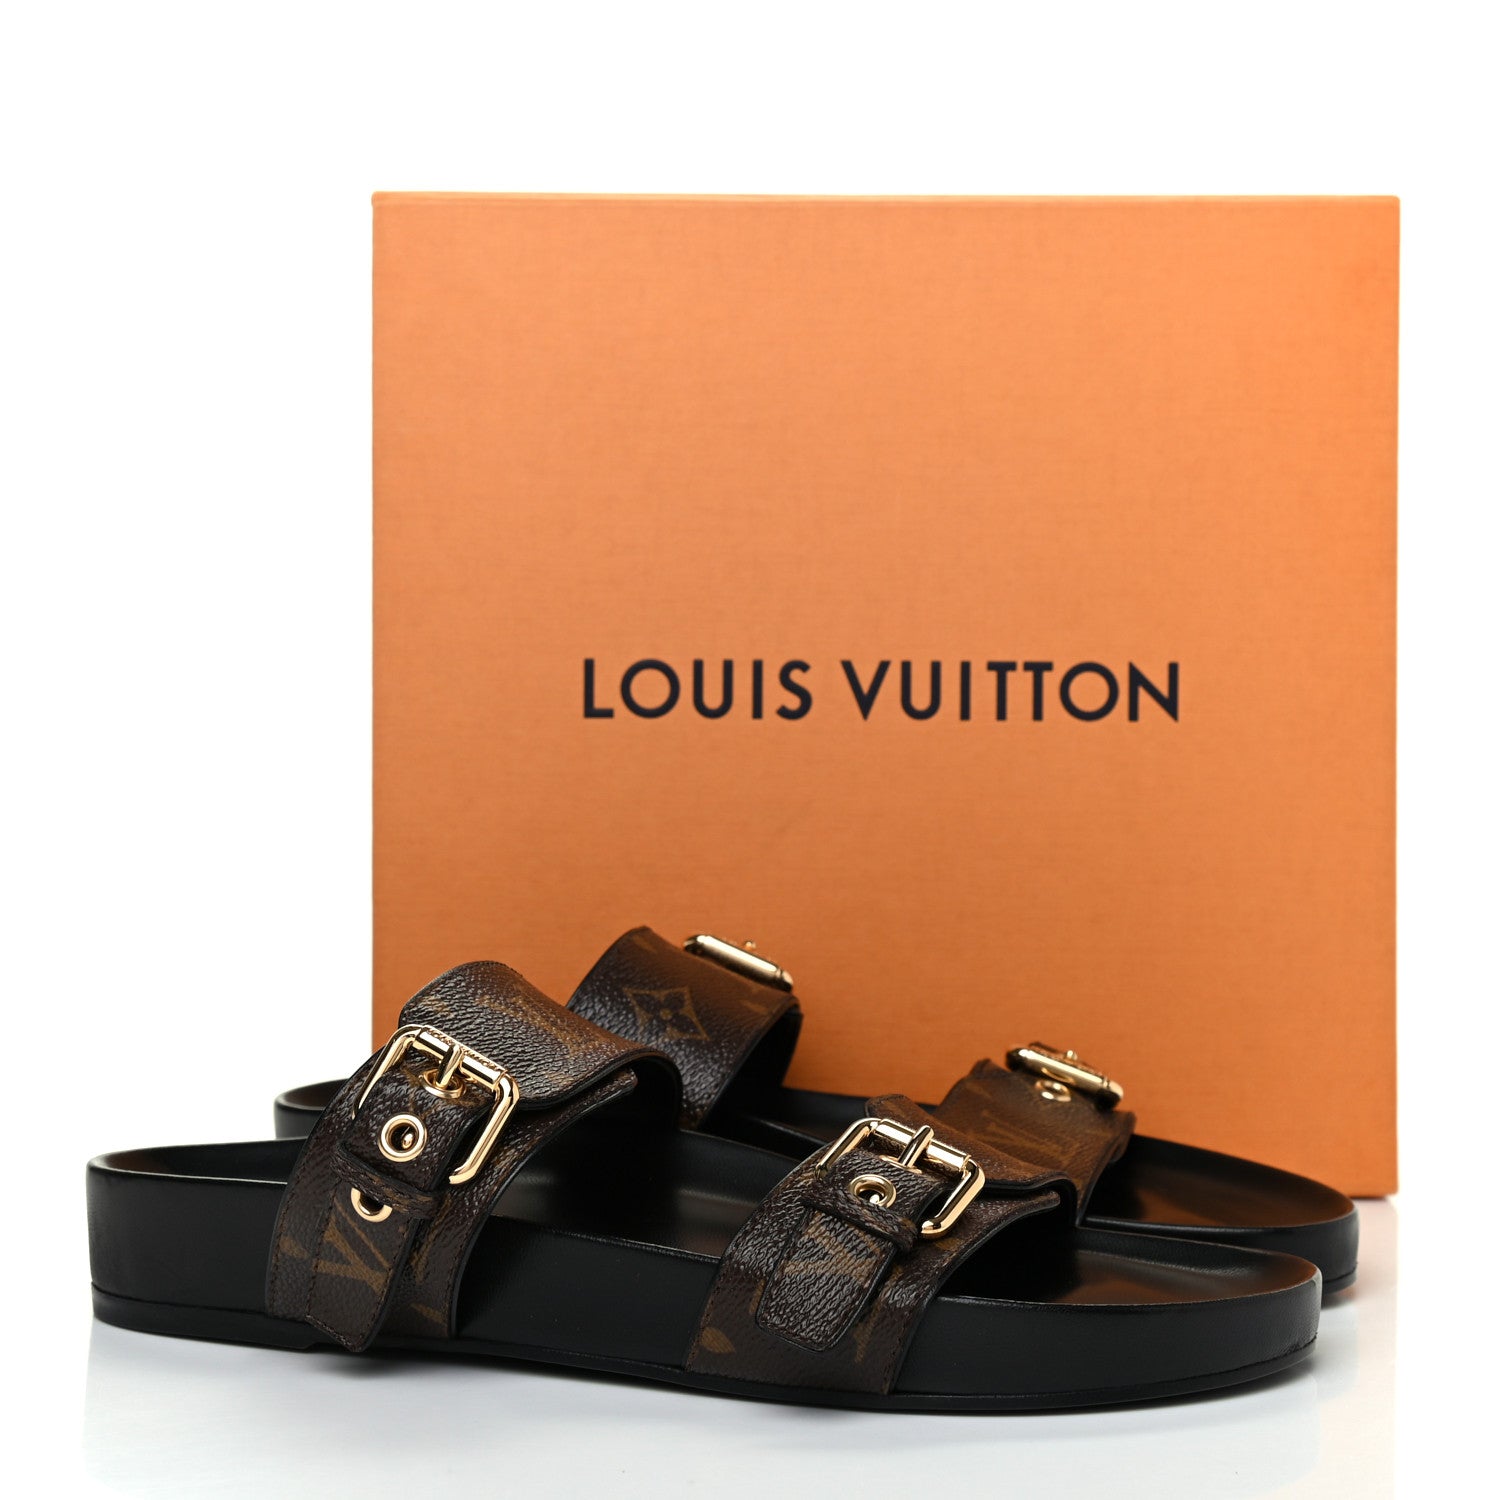 Louis Vuitton - Authenticated Bom Dia Sandal - Rubber White For Woman, Very Good condition